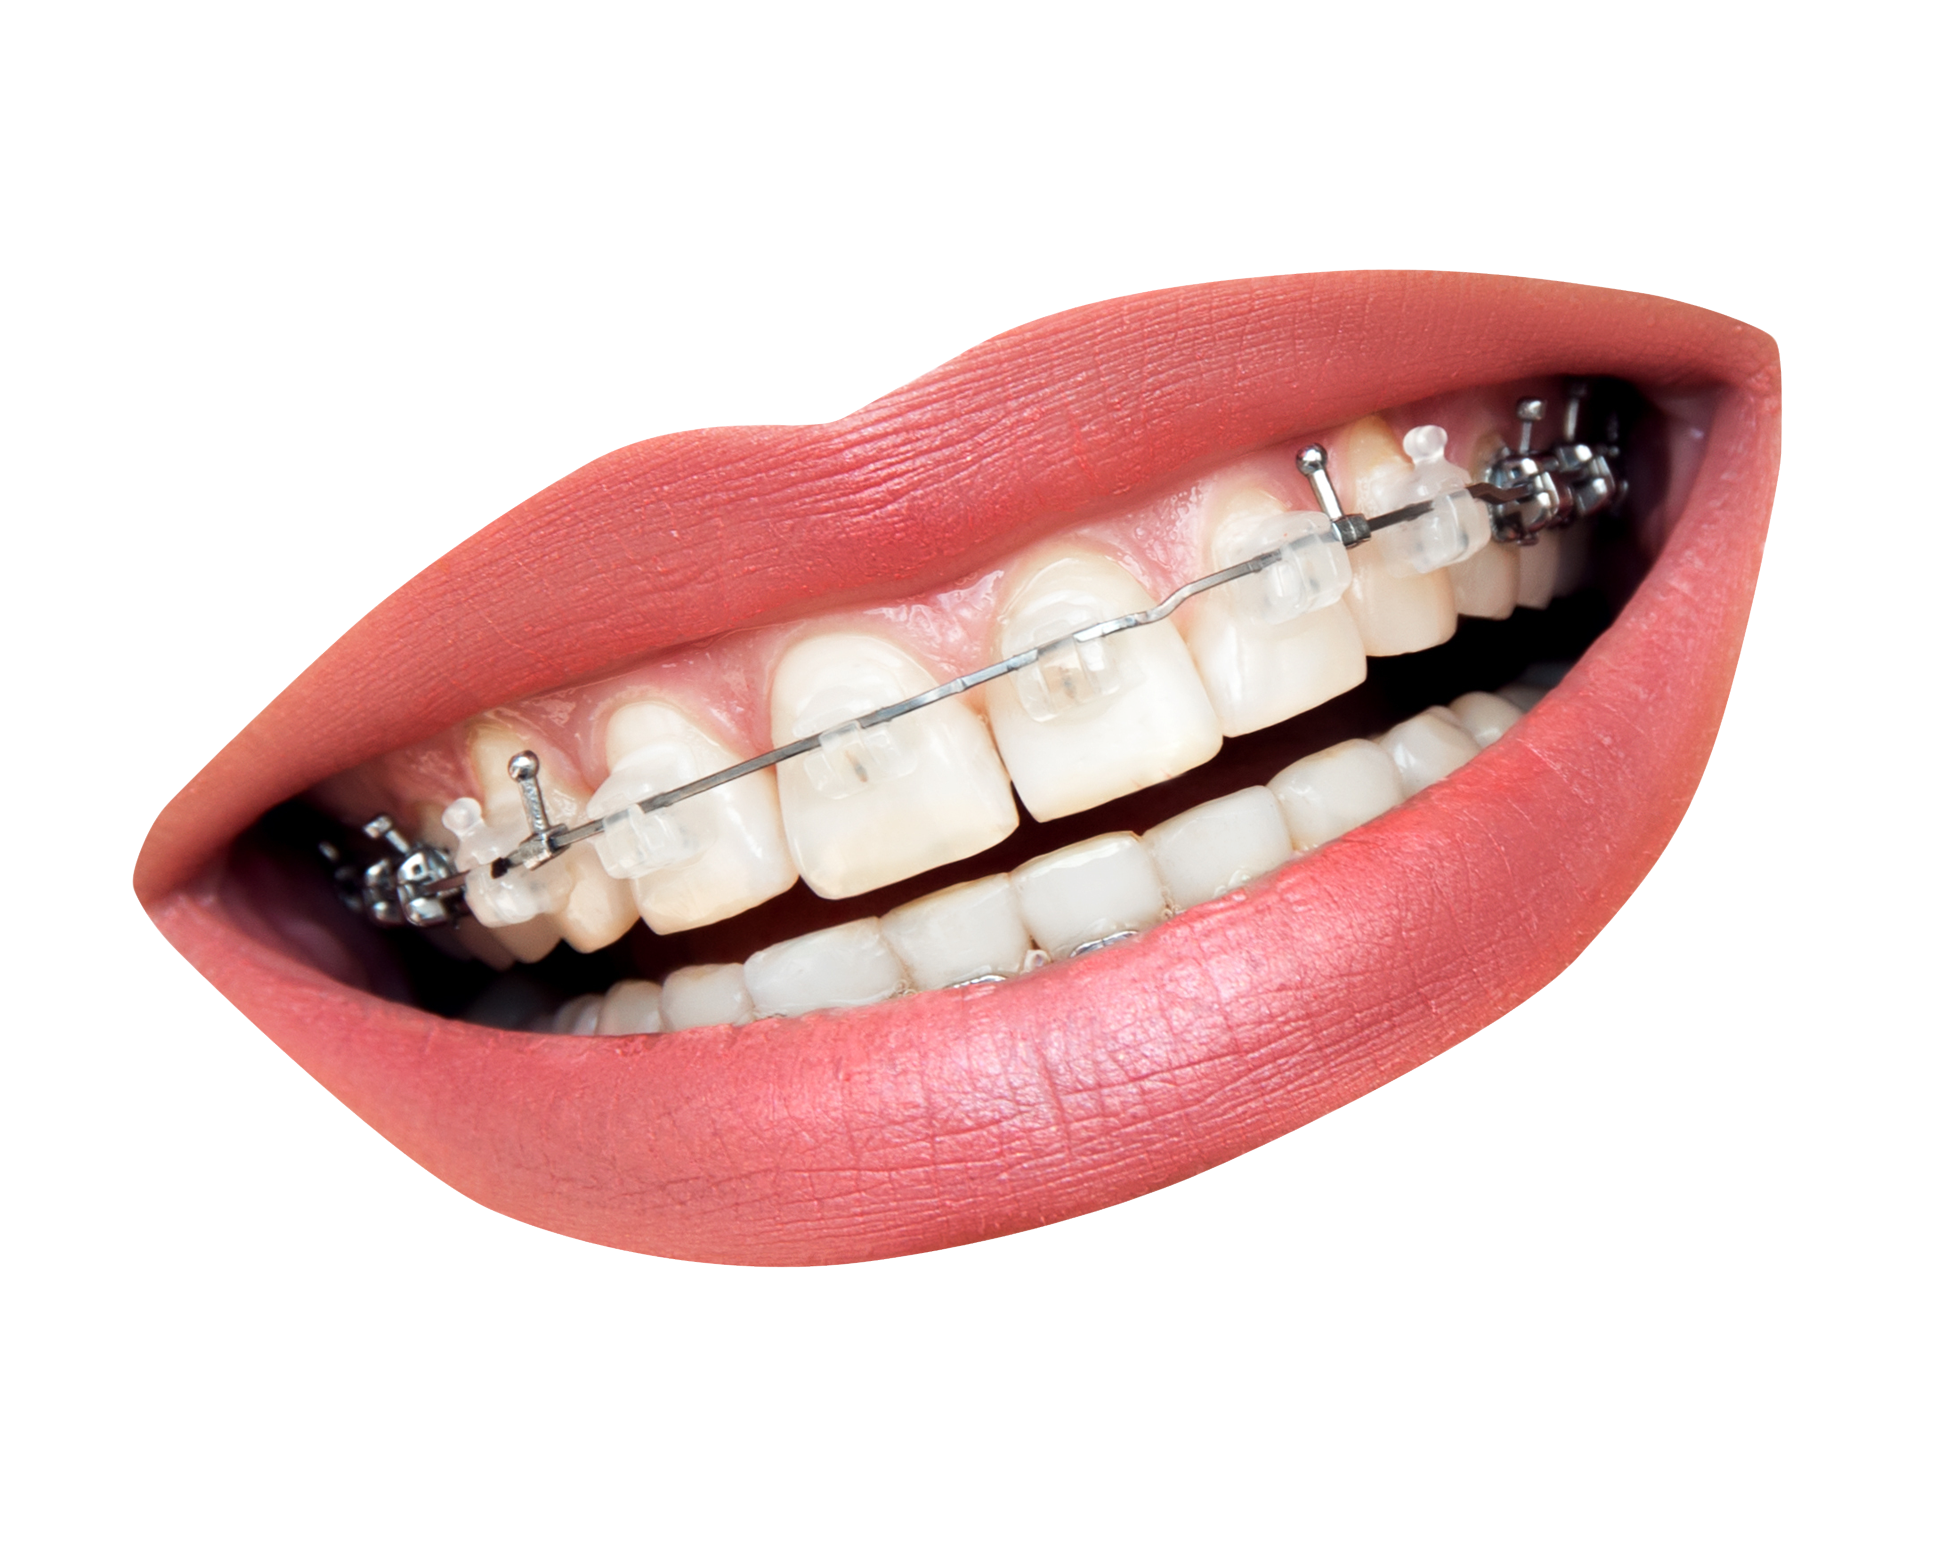 kisspng-dental-braces-dentistry-orthodontics-tooth-clear-a-teeth-with-braces-5a72963b44a719.5935776215174590032812